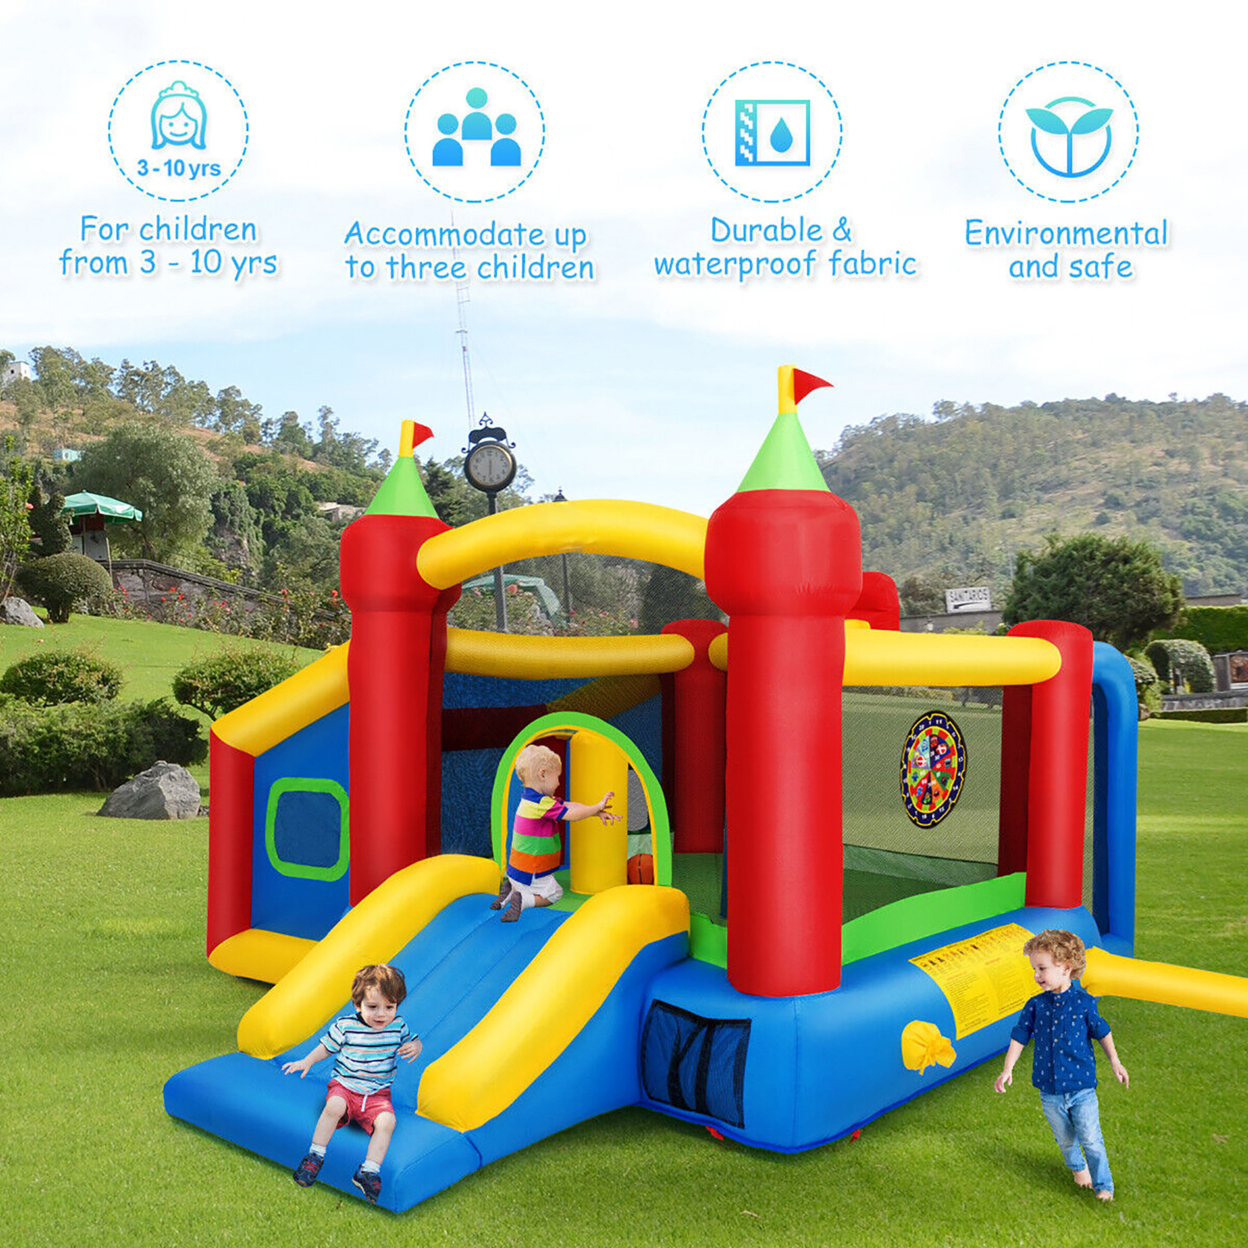 Kids Inflatable Bounce House Play Slide Jumping Castle Ball Pit With 550W Blower